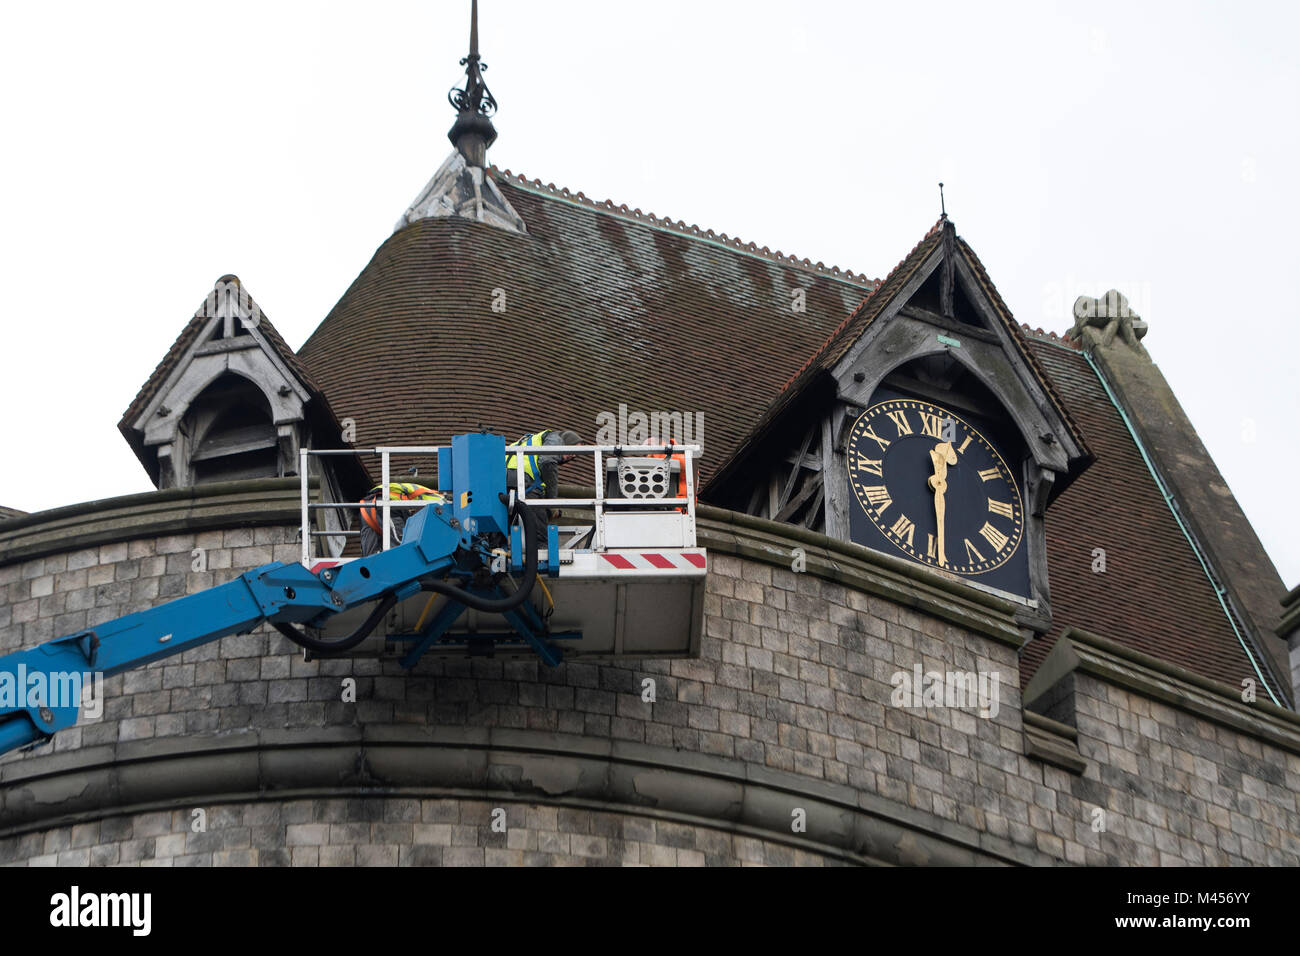 The Round Tower in Windsor Castle being inspected by workmen in a very tall cherry picker Stock Photo